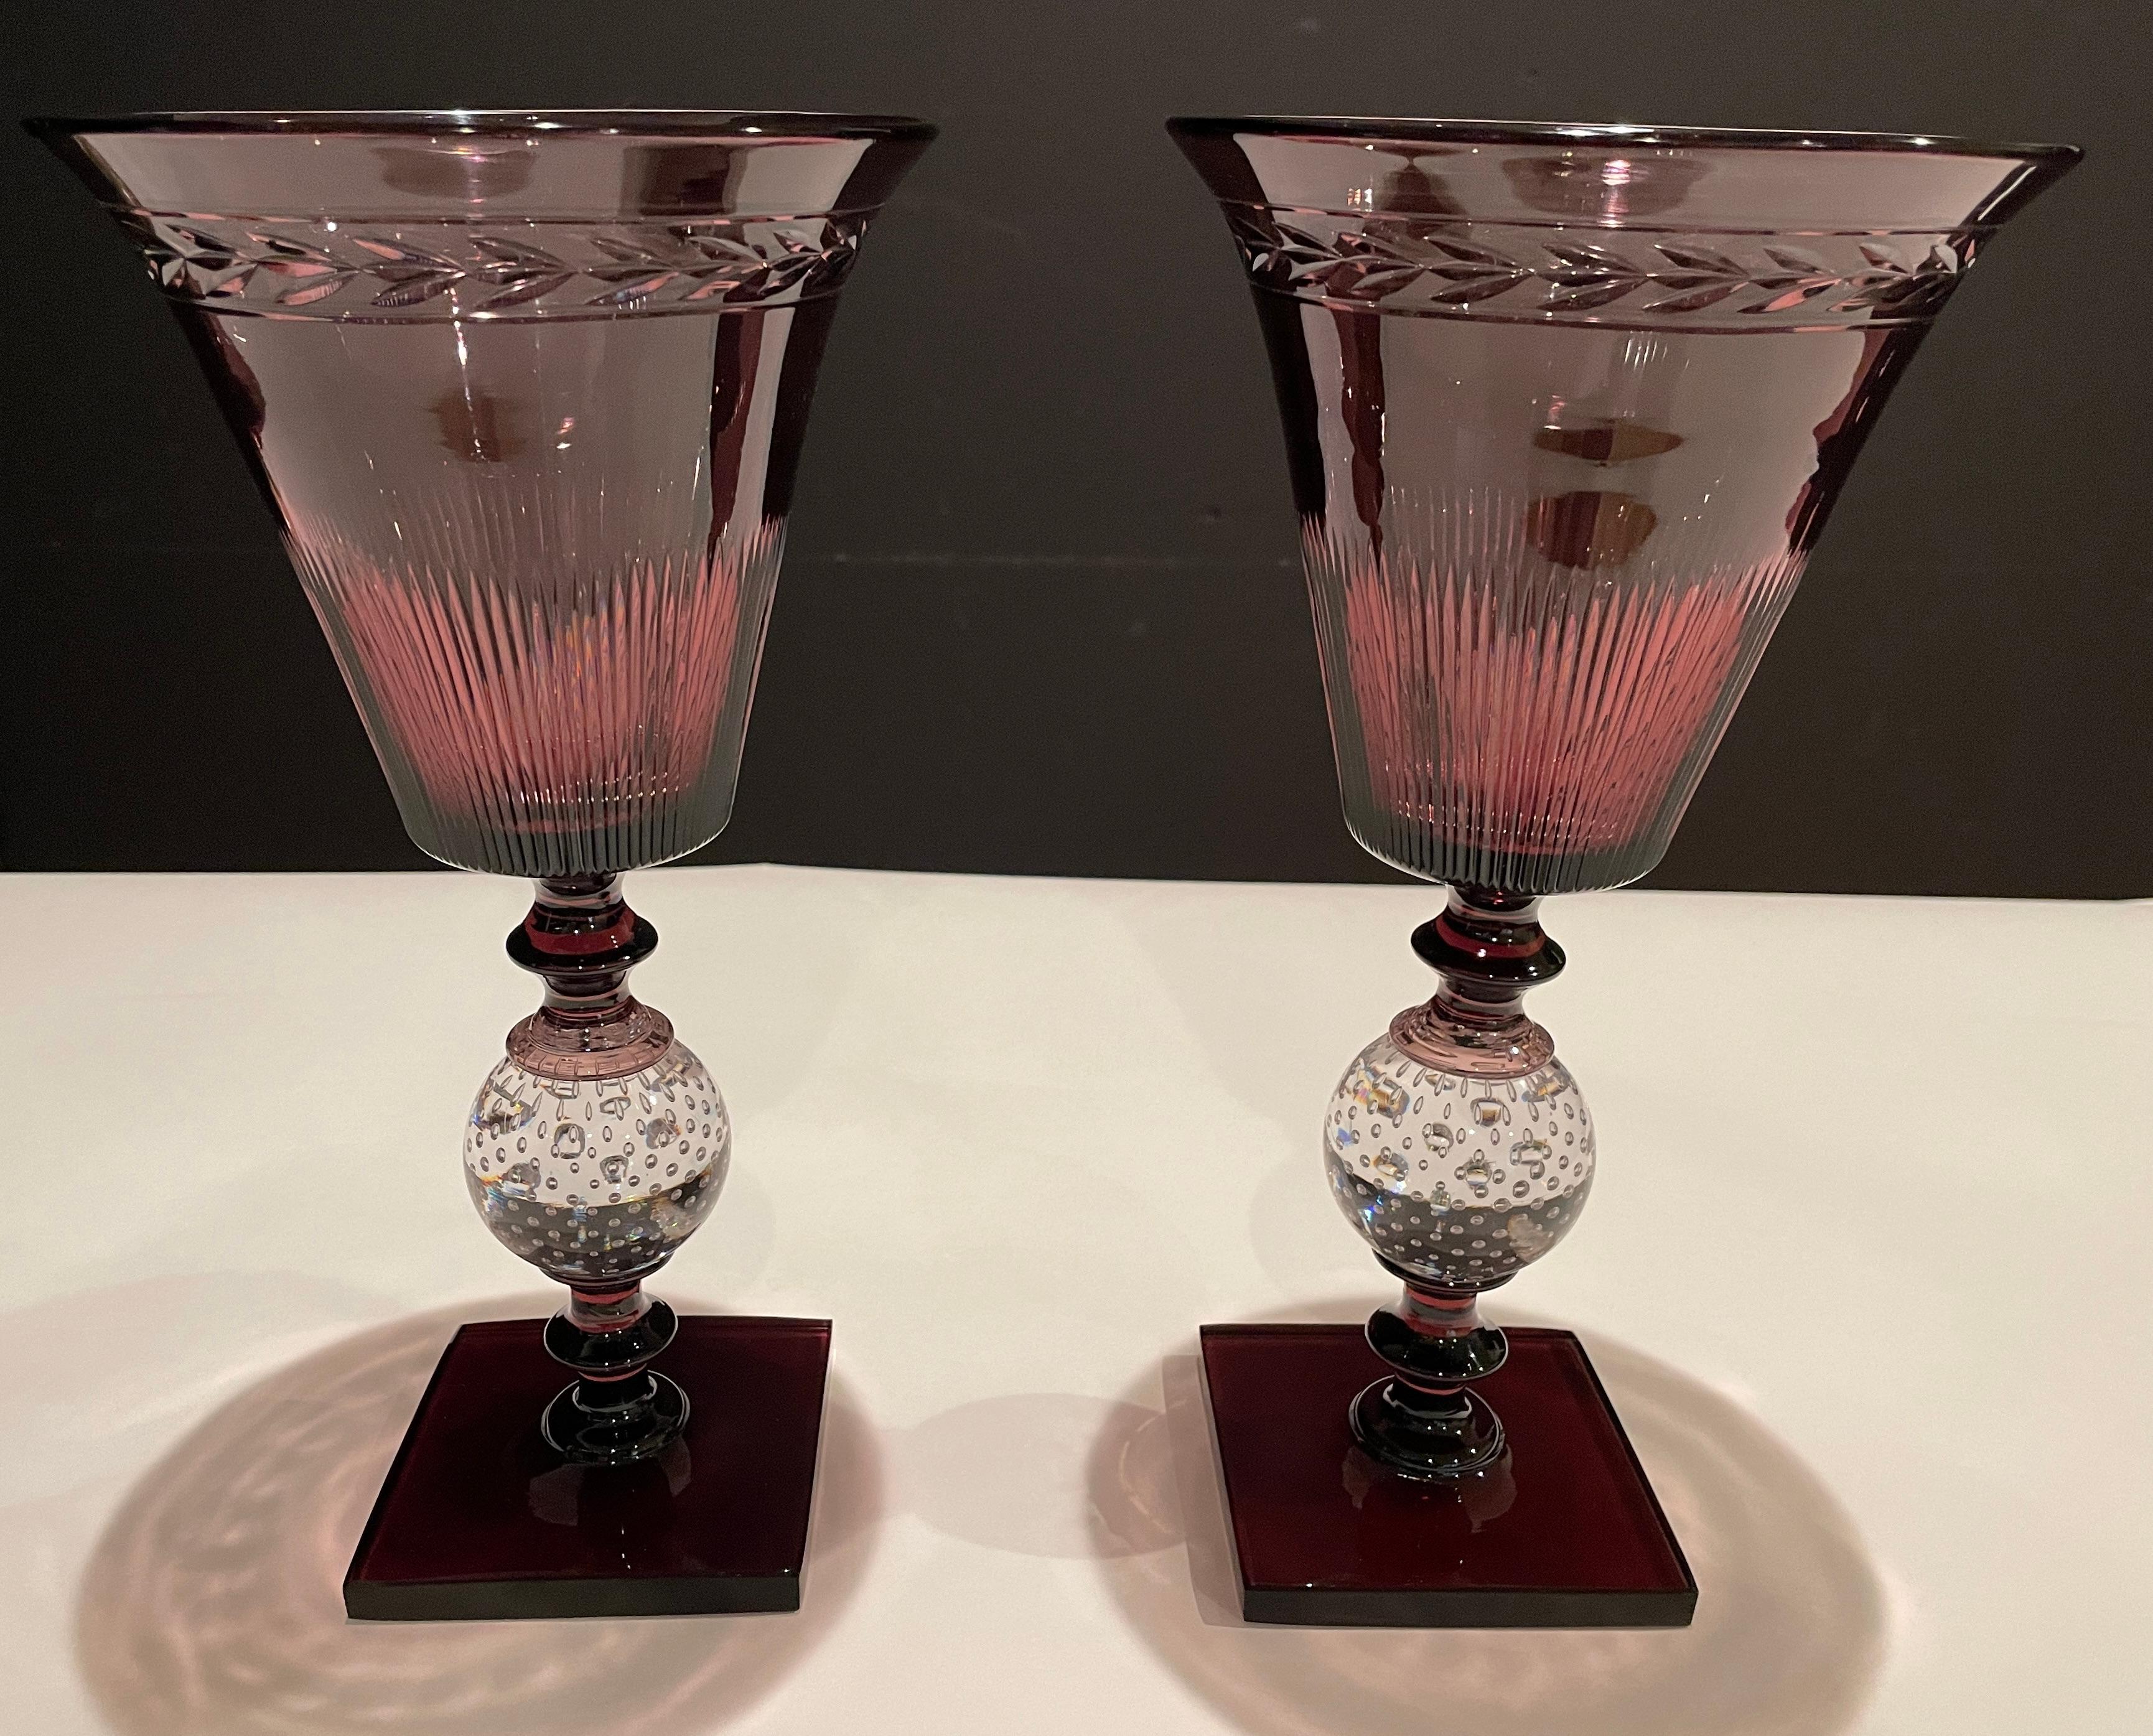 Pair of Pairpoint amethyst glass controlled bubble vases. The flared trumpet form top with copper wheel cut design above a clear controlled bubble ball and an amethyst square base. Elegant and modern lines.